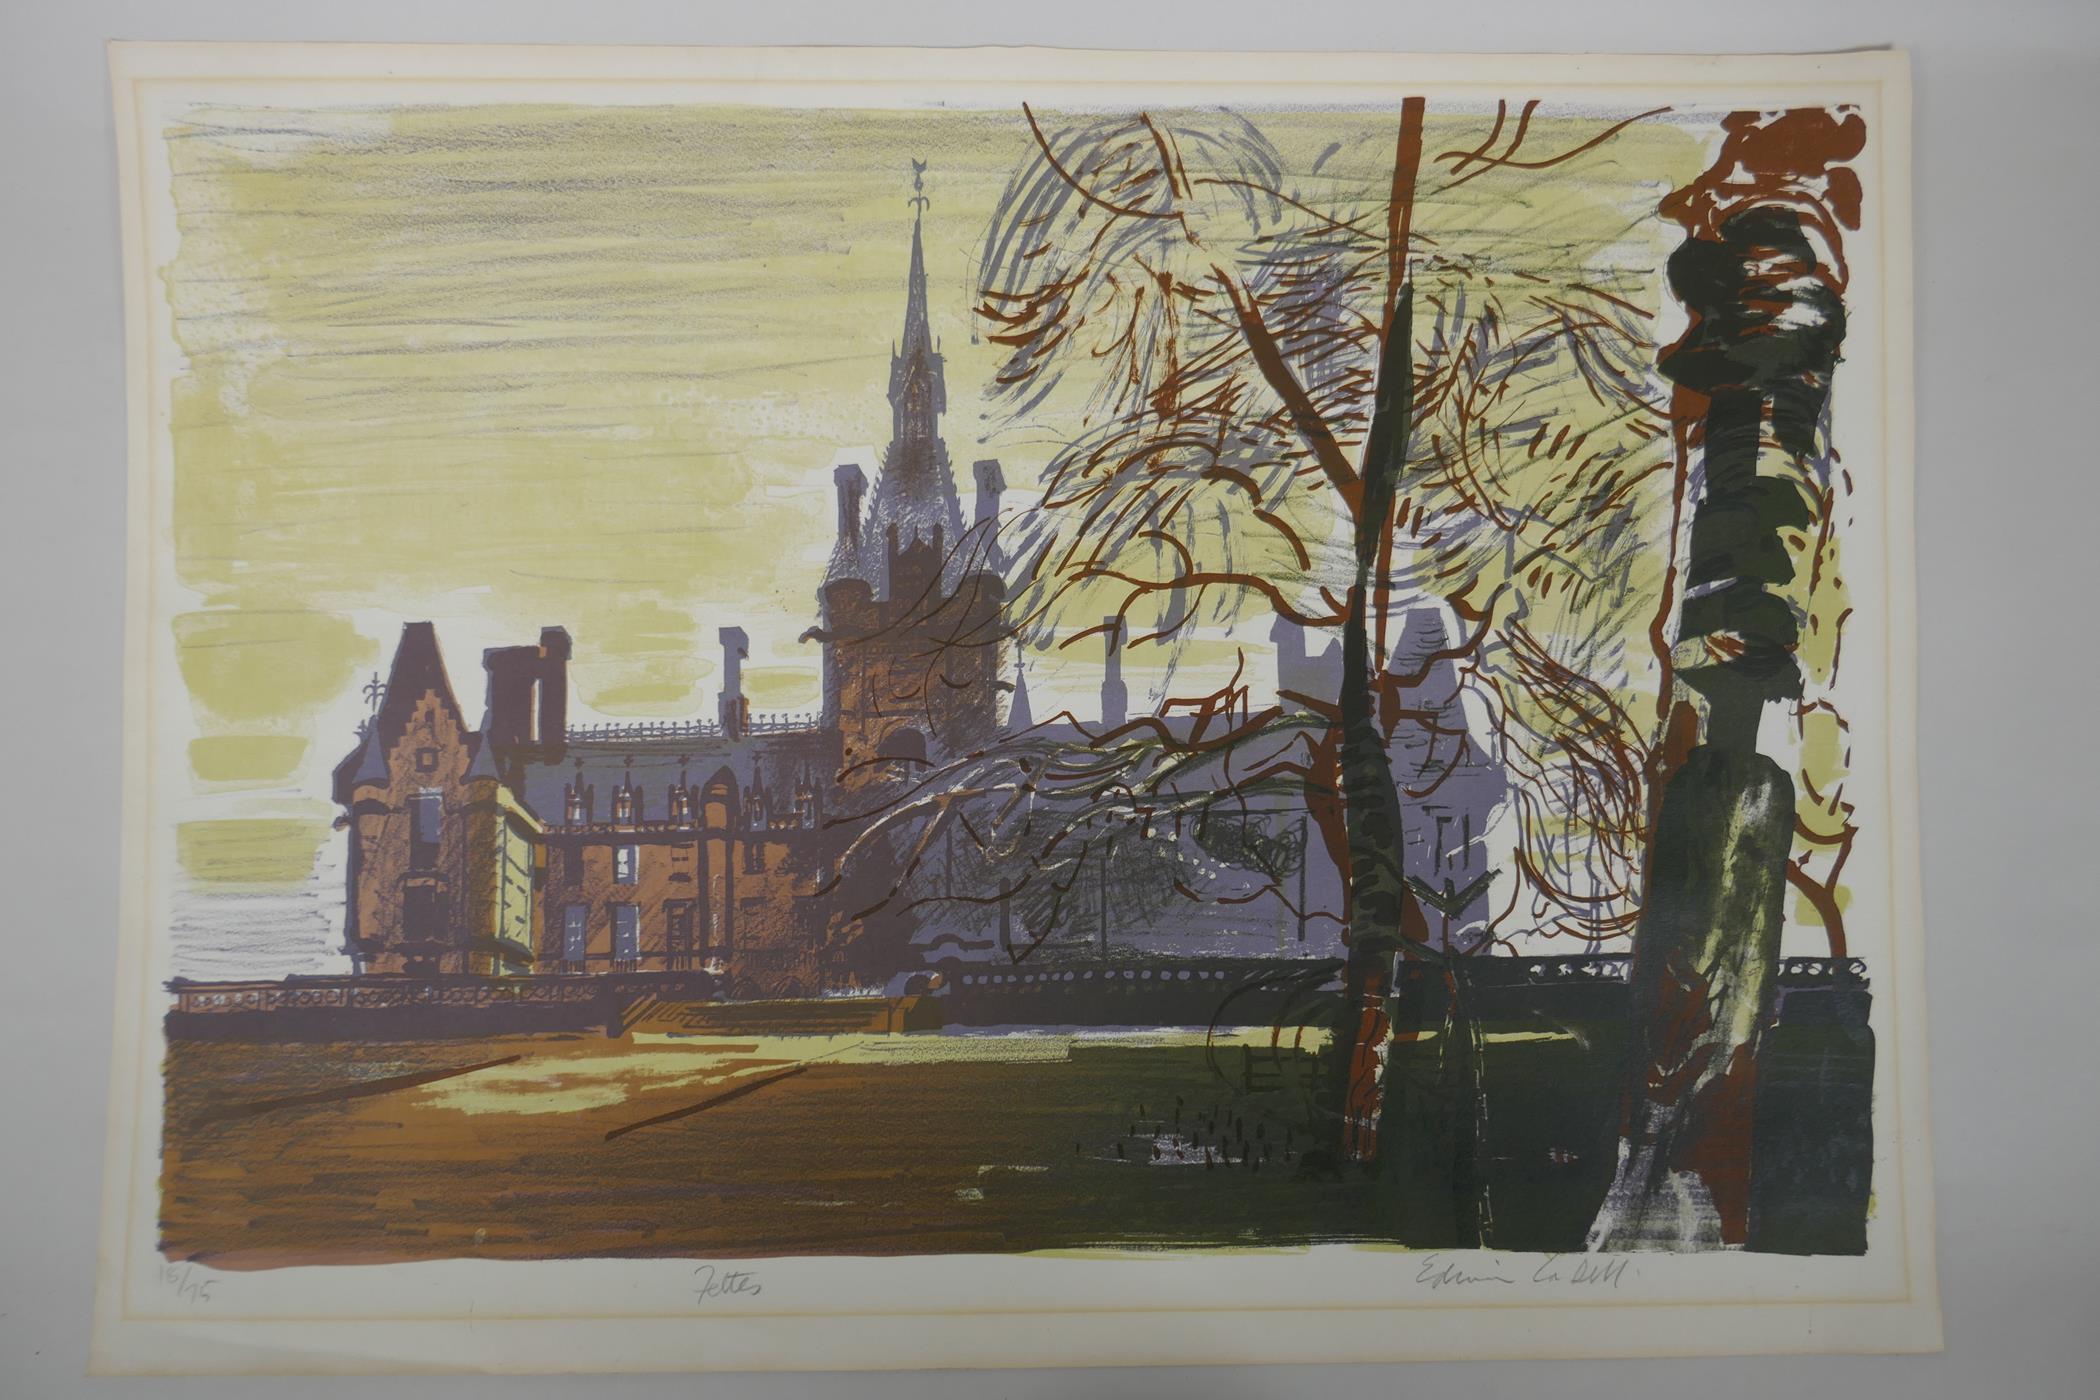 'Fettes', signed Edwin Ladell, and a wooded path by dwellings, signed J. Ramsden, both unframed - Image 2 of 8